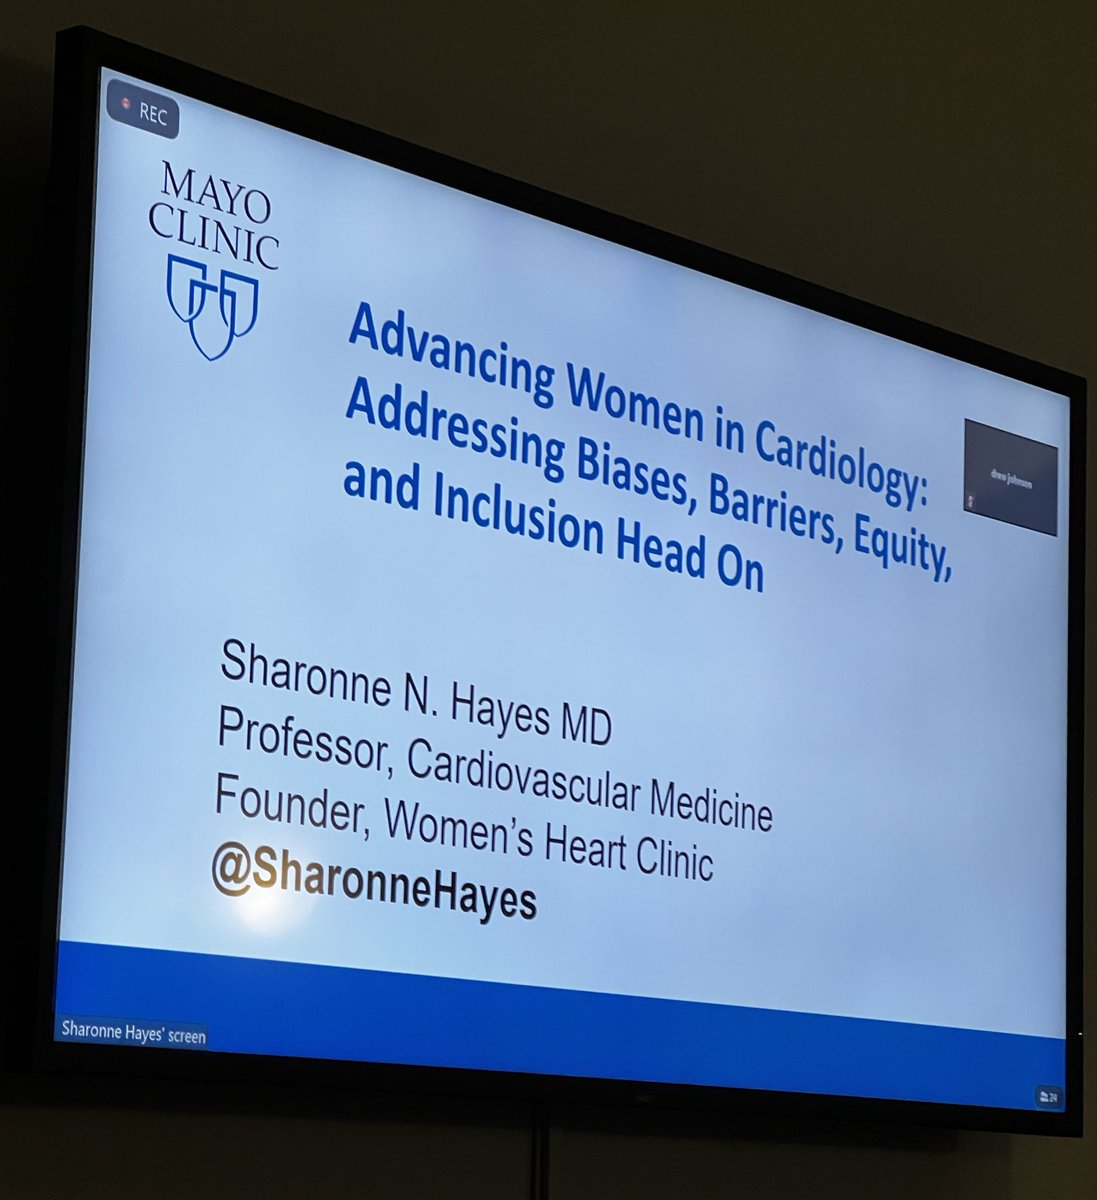 And now to the main event…we are honored to host Dr. @SharonneHayes from Mayo Clinic during Women’s History Month, here to discuss Advancing Women in Cardiology. Thank you @DavidWienerMD for the excellent introduction!! #Heforshe #womeninmedicine #womenincardiology ❤️